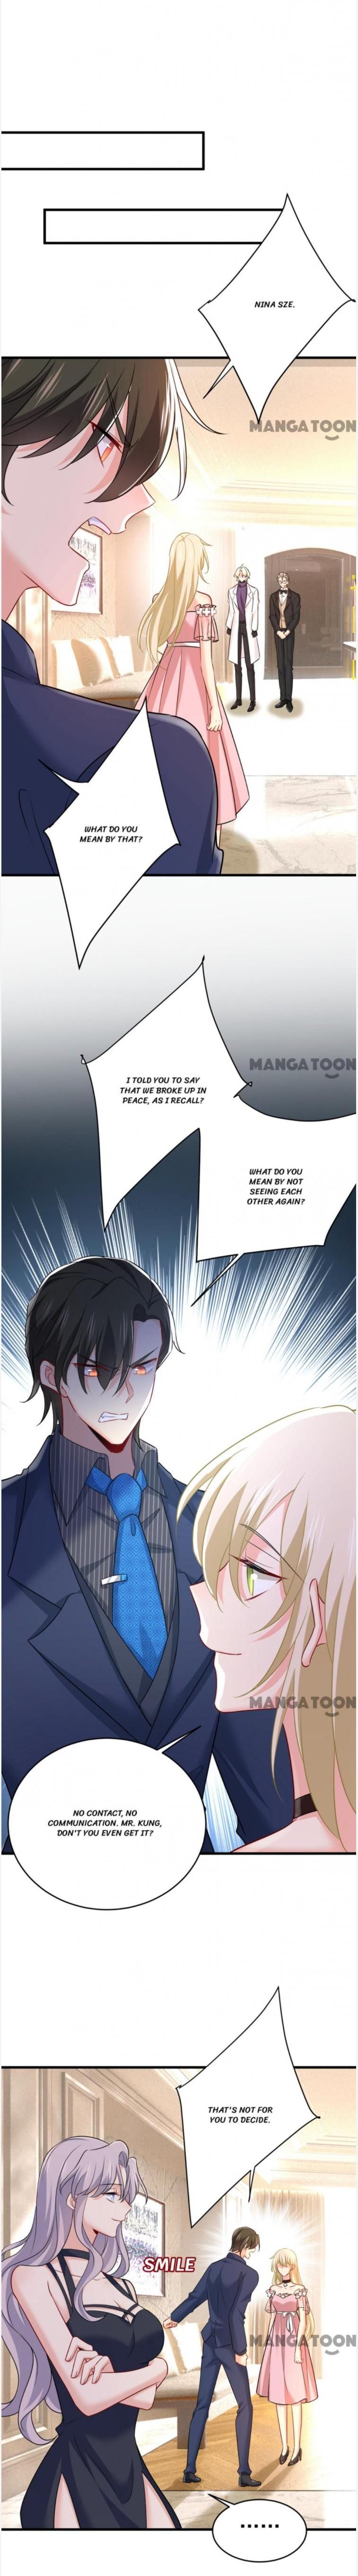 CEO Above, Me Below Chapter 477 page 4